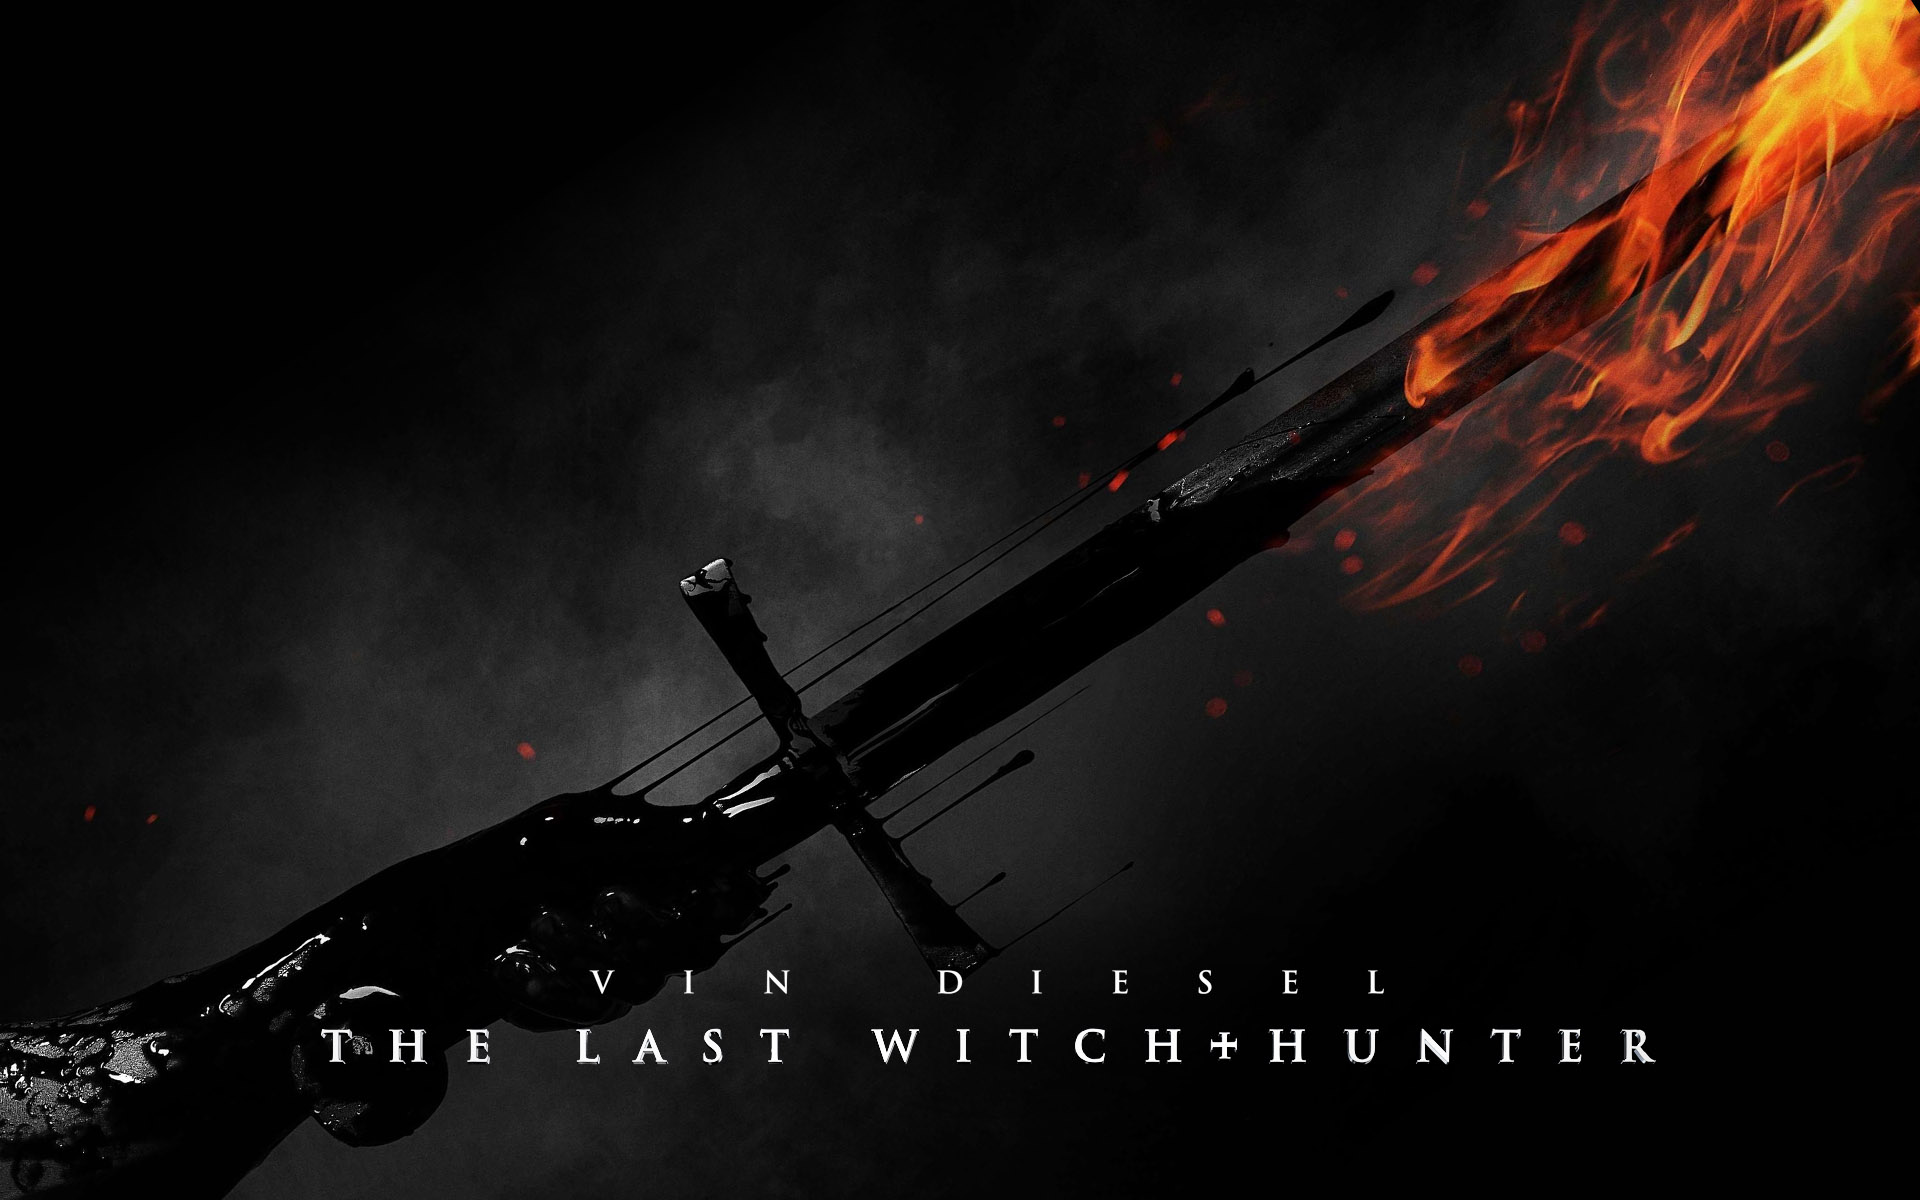 Movie The Last Witch Hunter Wallpaper